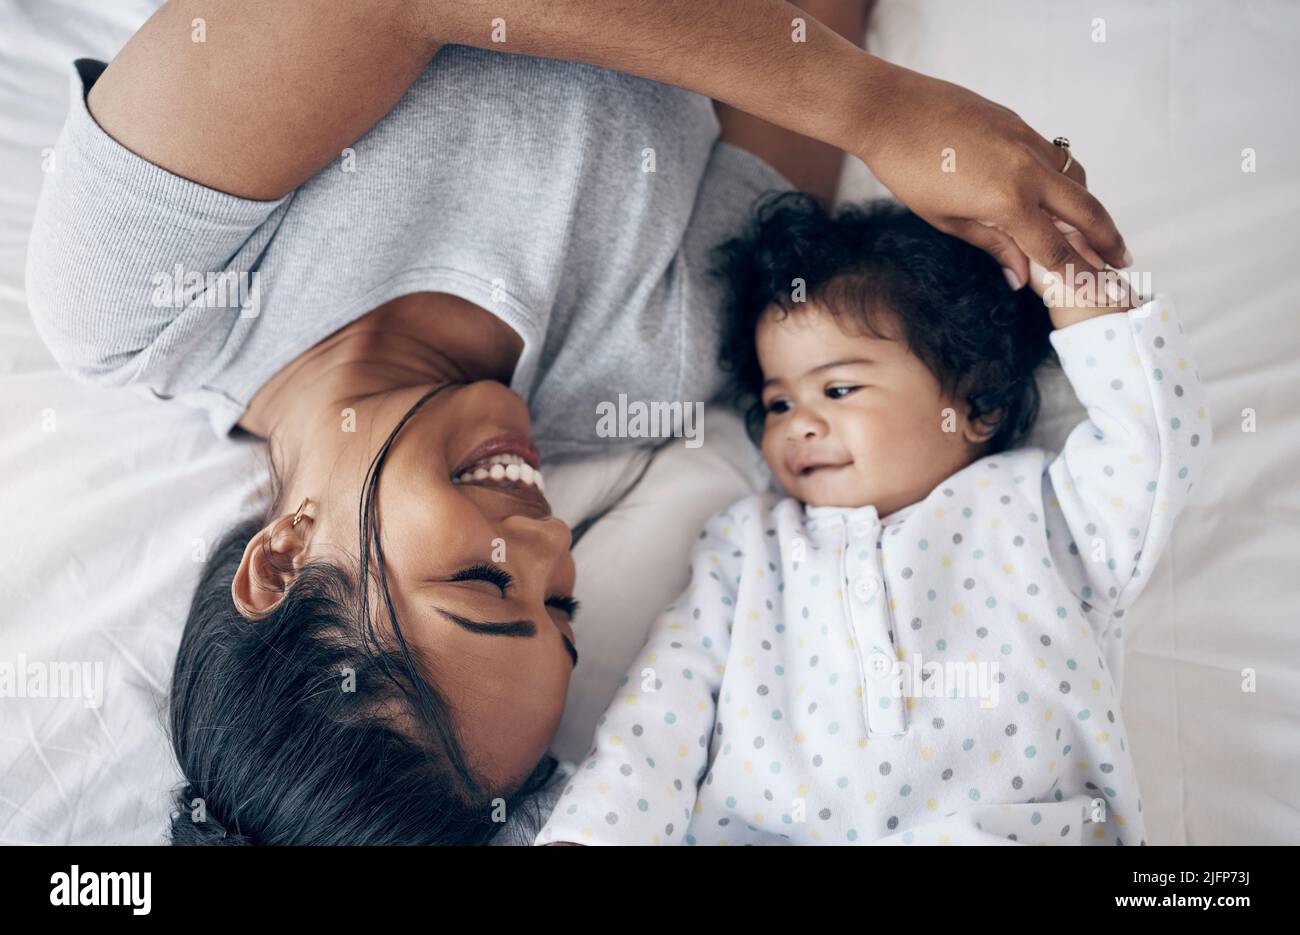 Mom, youre upside down. Shot of a young mother bonding with her baby girl in bed at home. Stock Photo